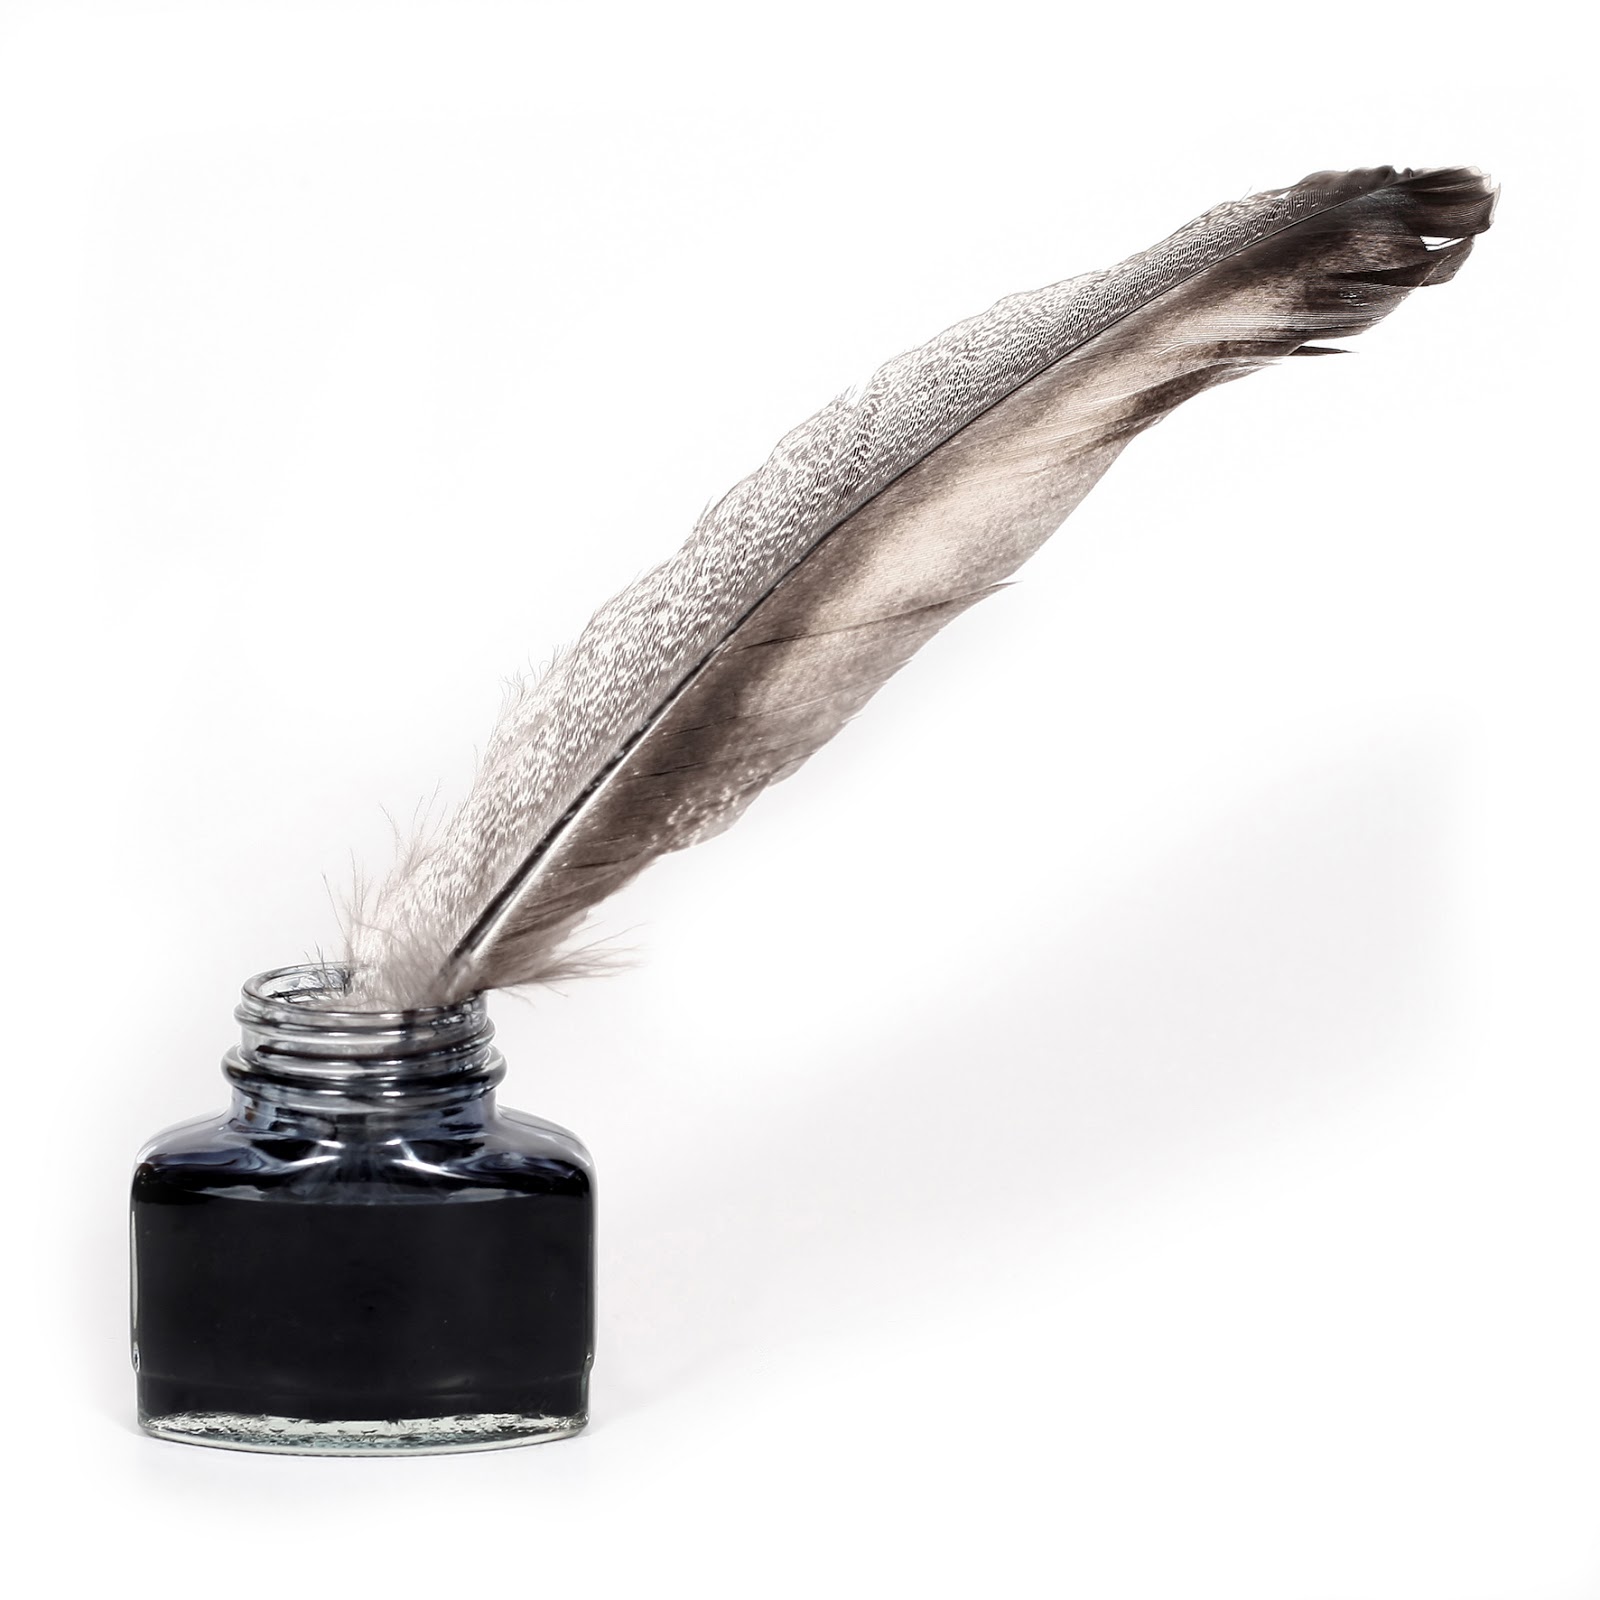 Writing With A Feather Quill Pen | Images Guru